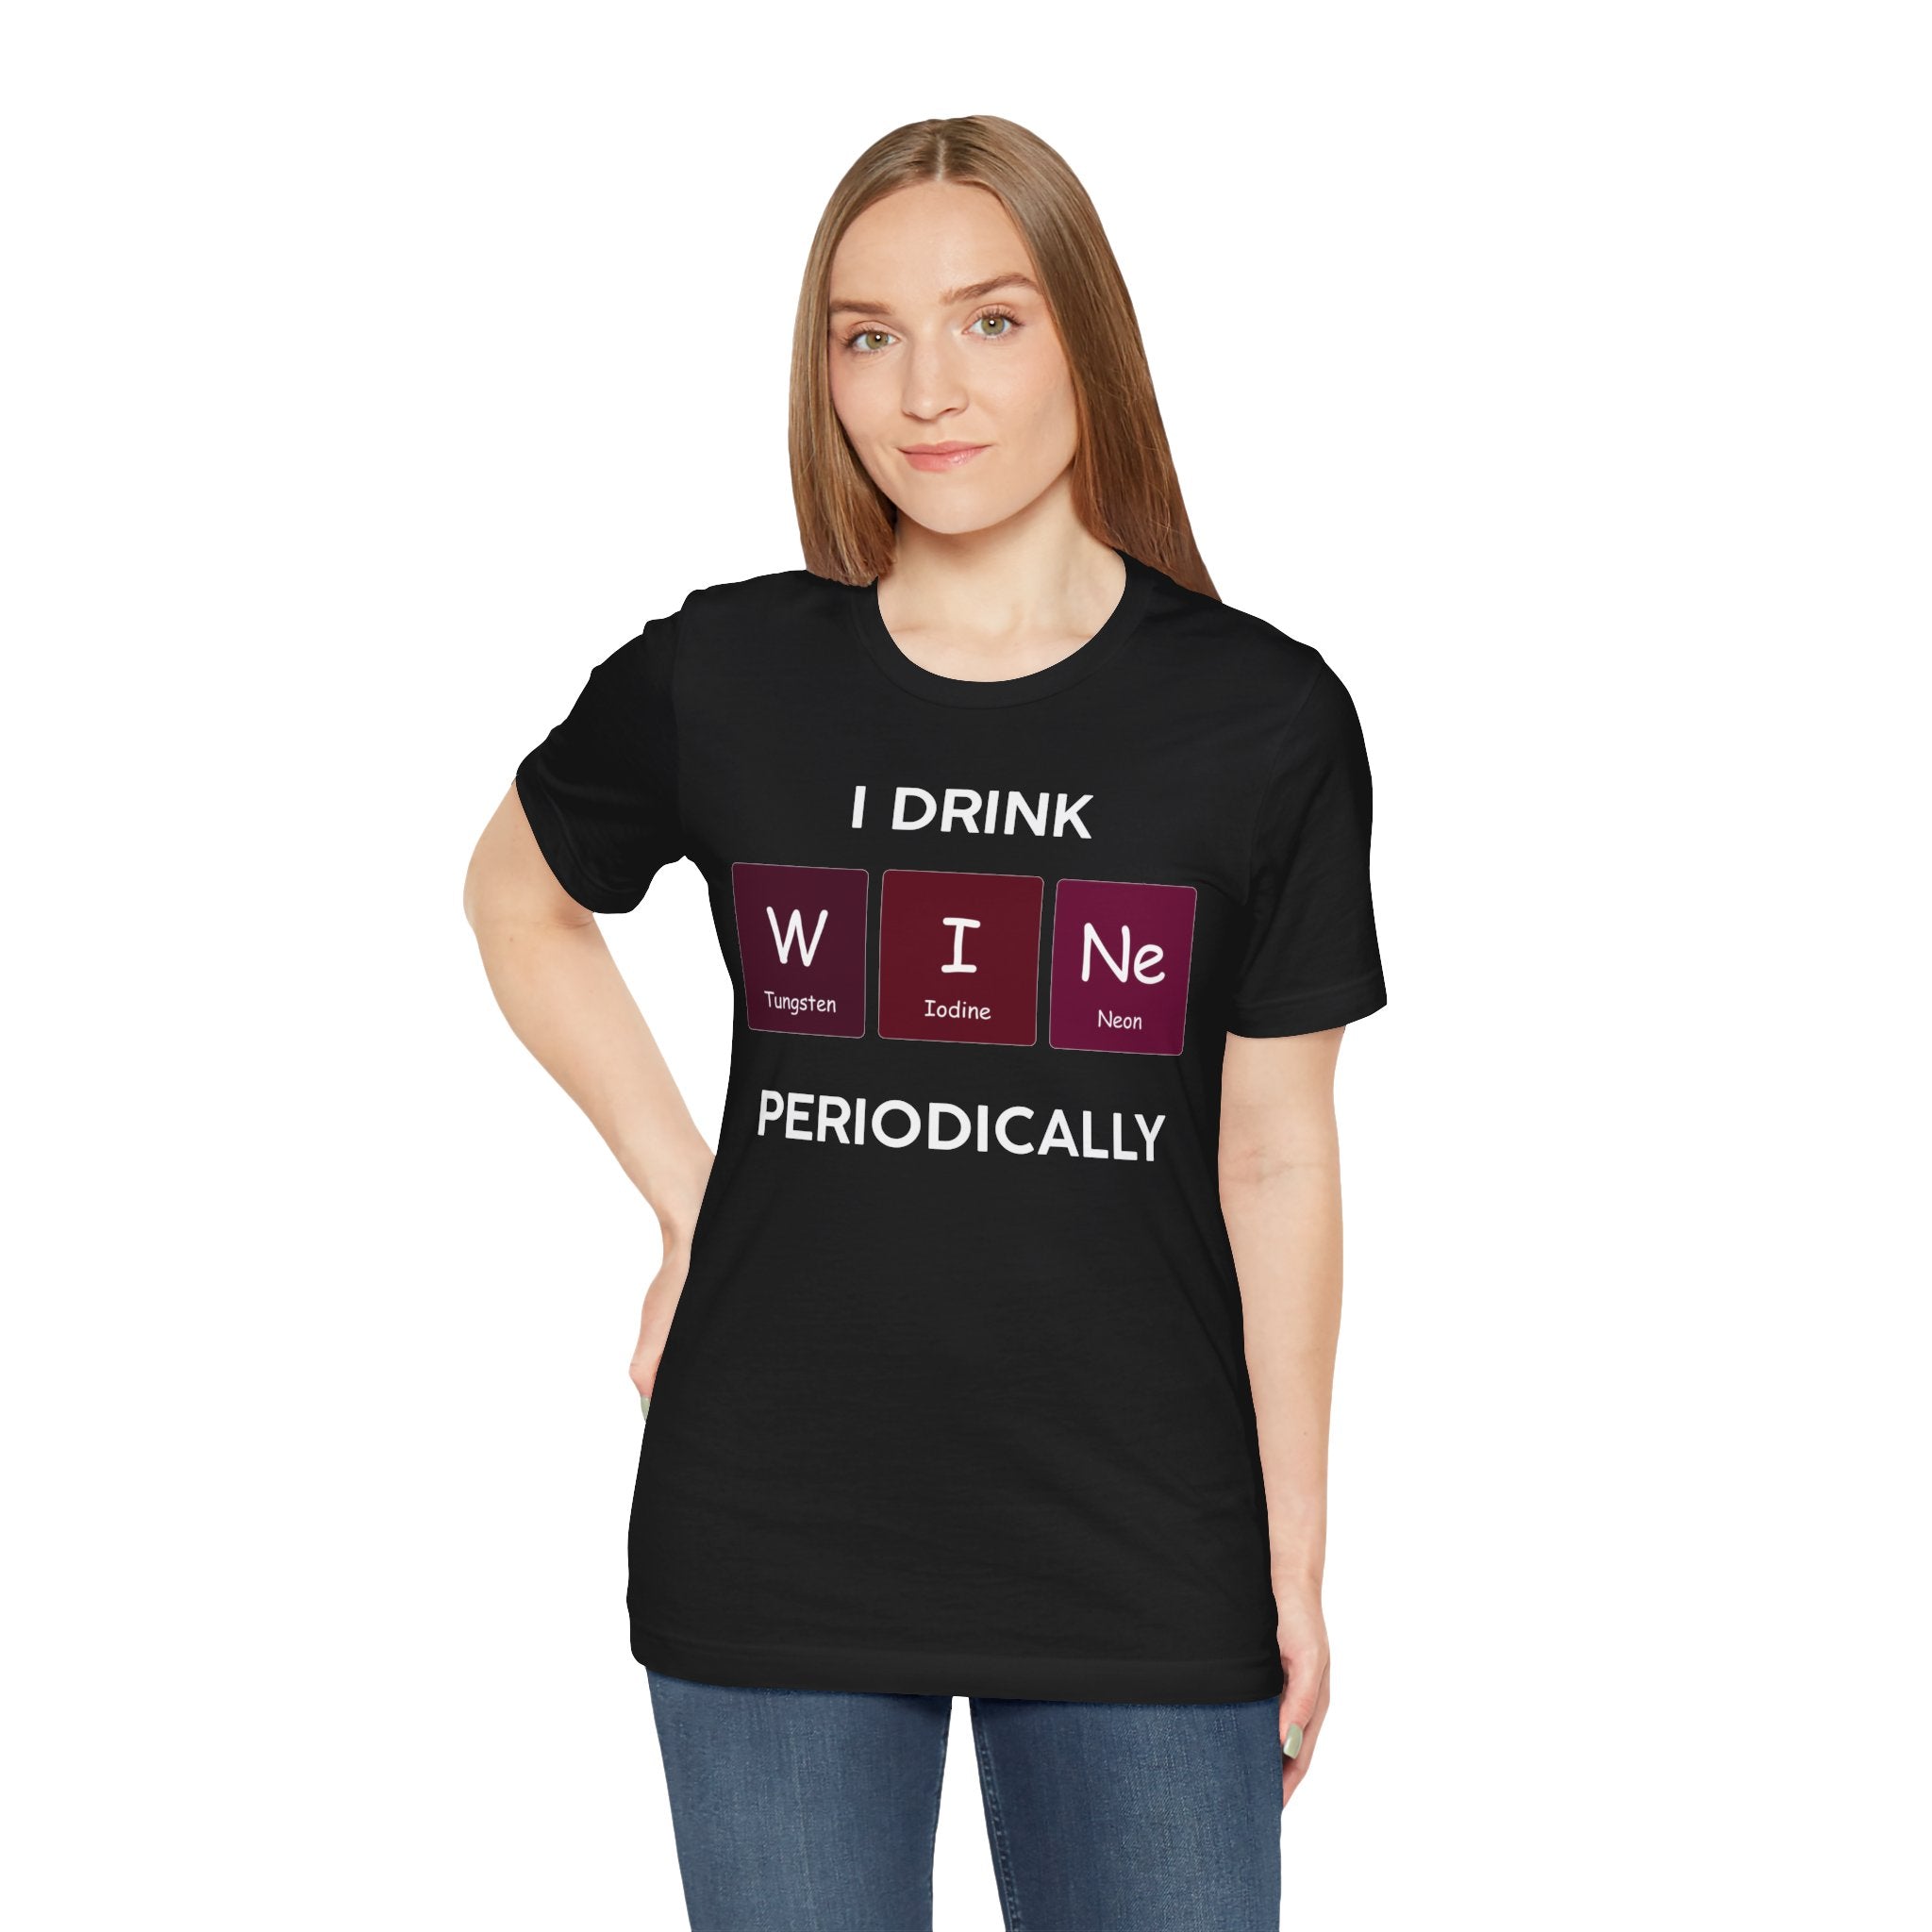 Woman in a black unisex jersey tee with "I Drink W-I-Ne" printed in white and pink, featuring elements from the periodic table.